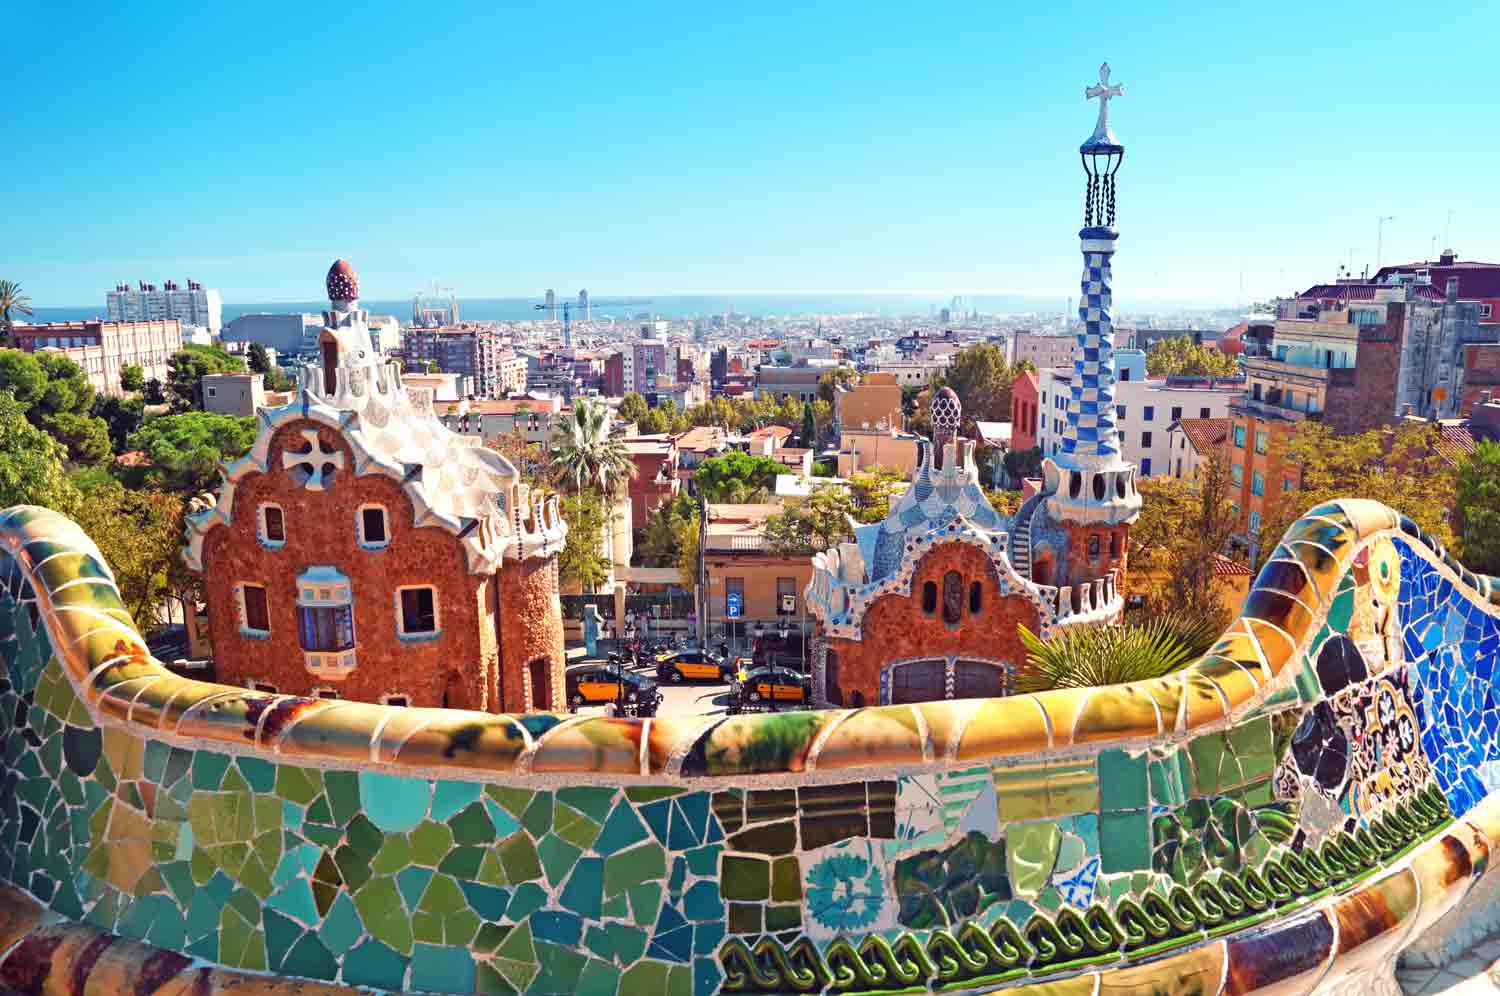 parc guell and views over barcelona city in spain